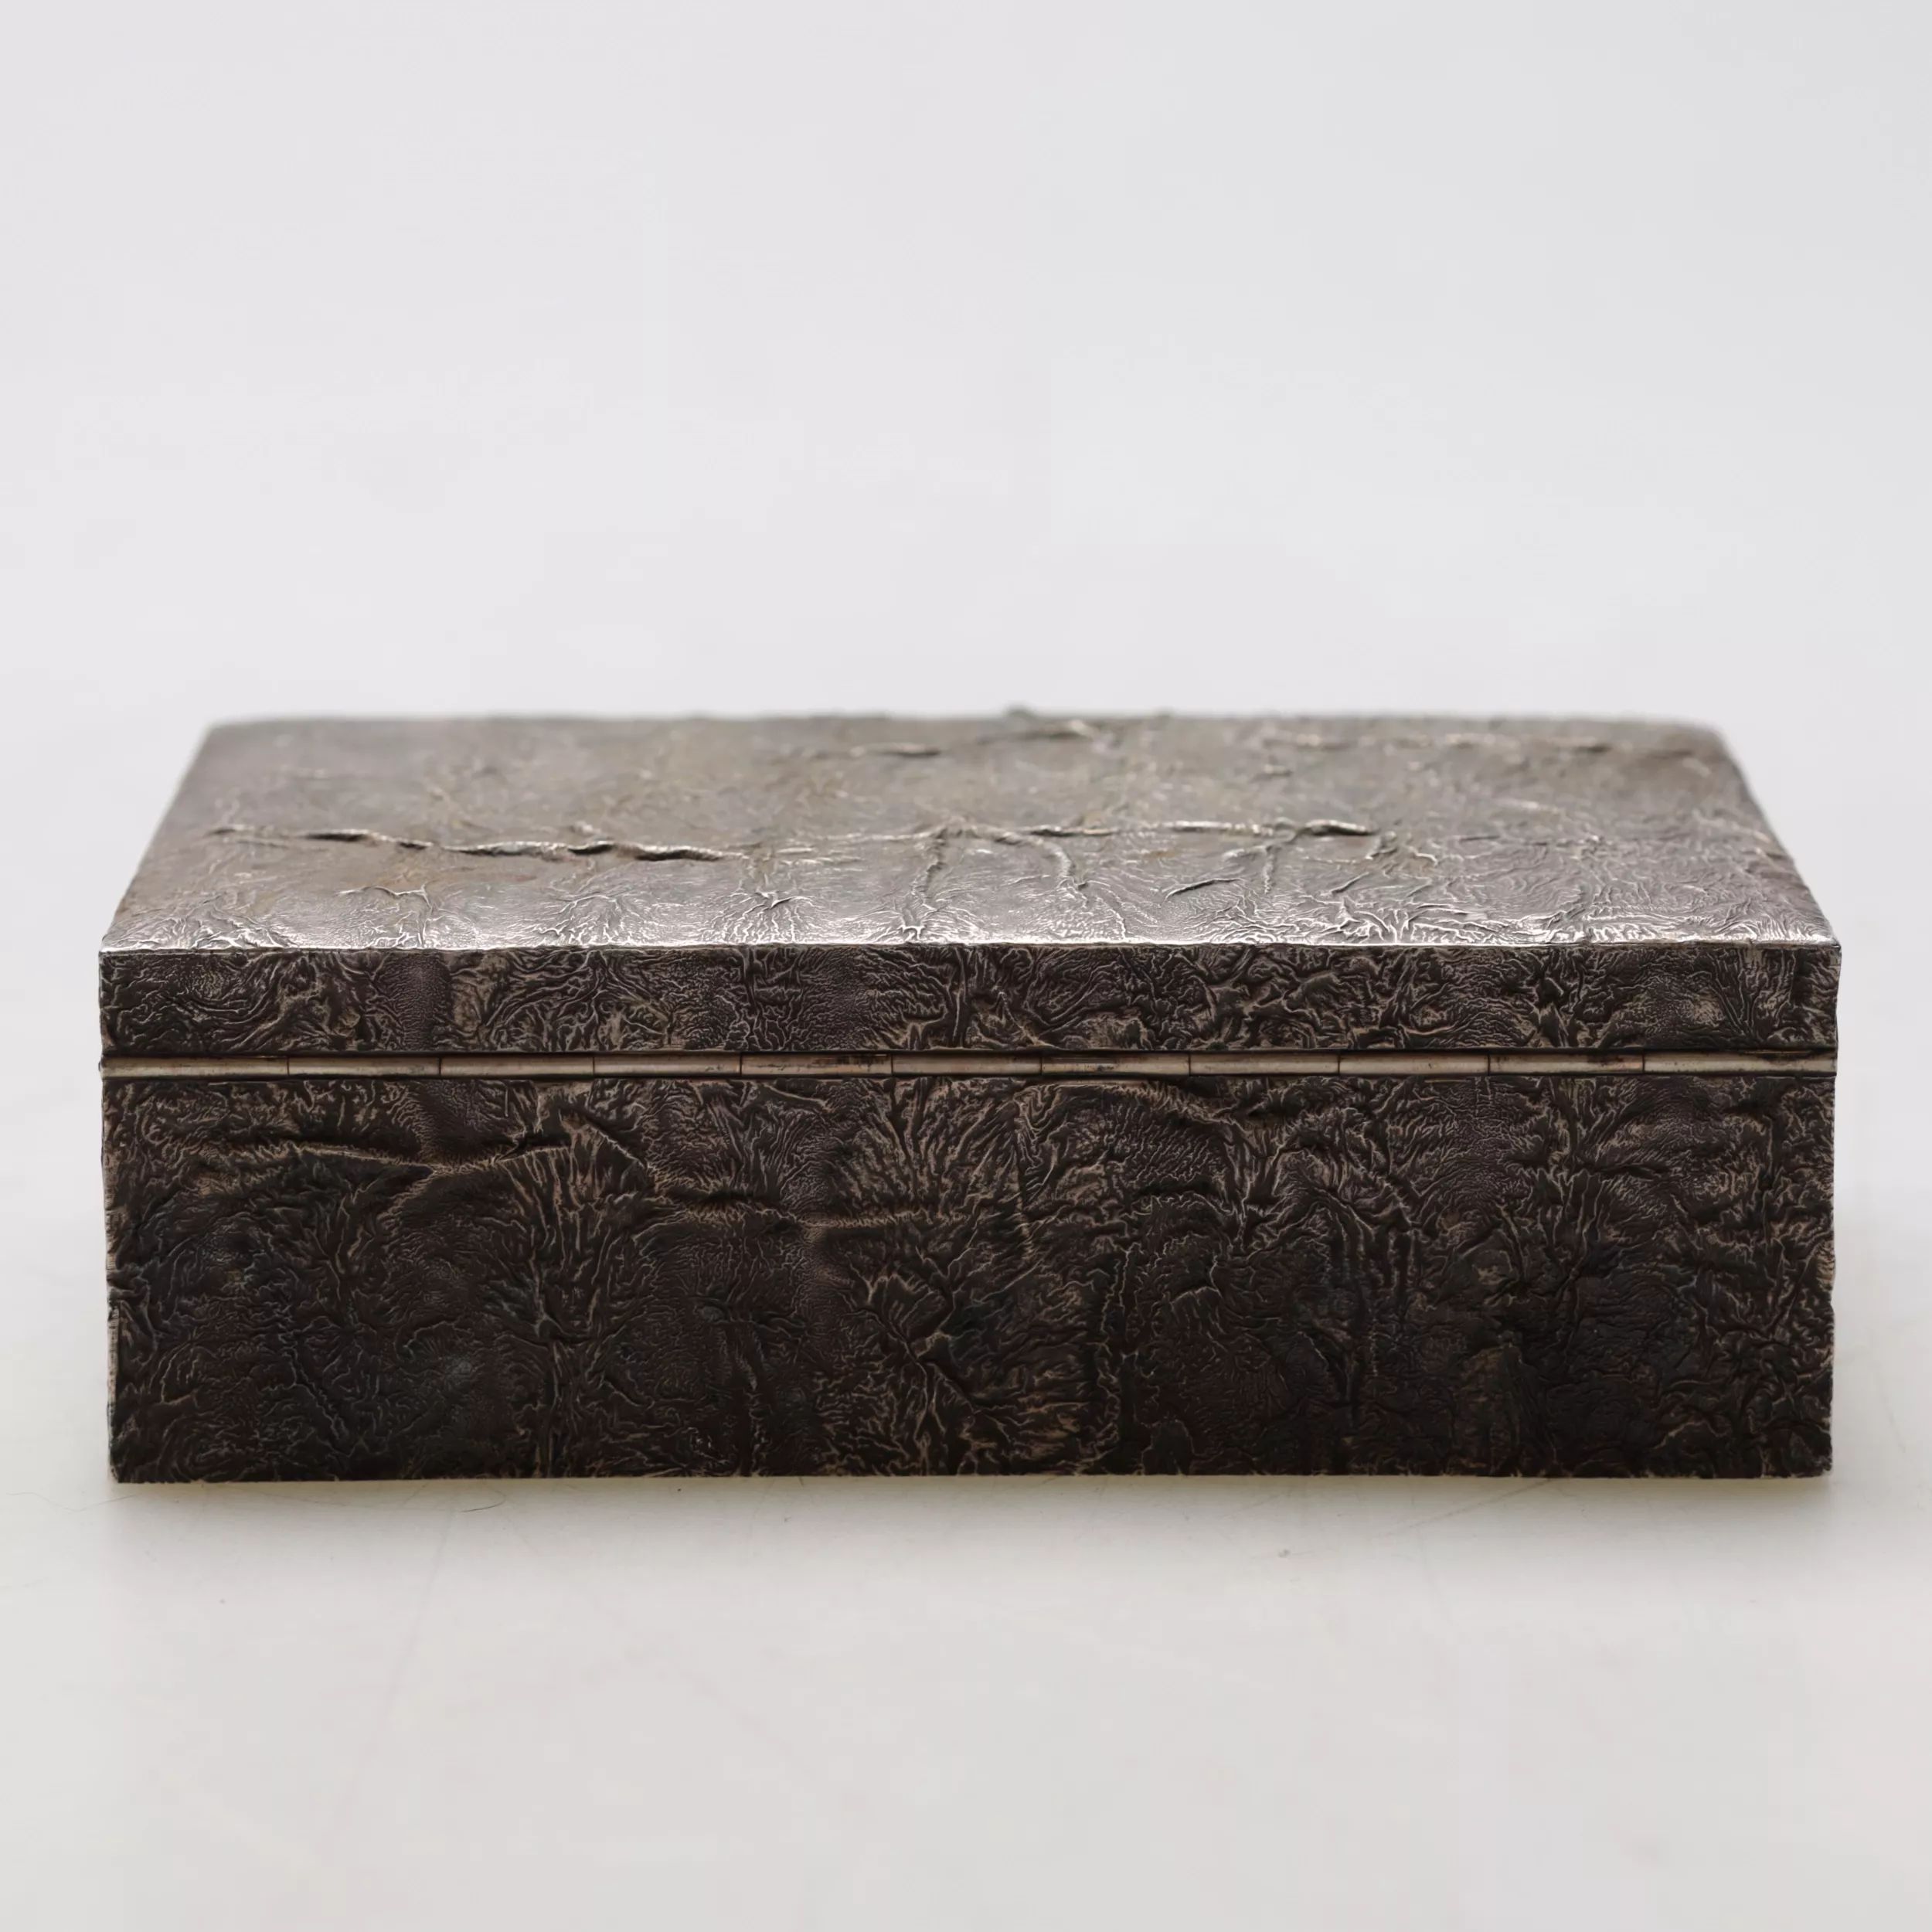 Silver box for cigarettes Nugget Finland. Early 20th century. - Image 5 of 8